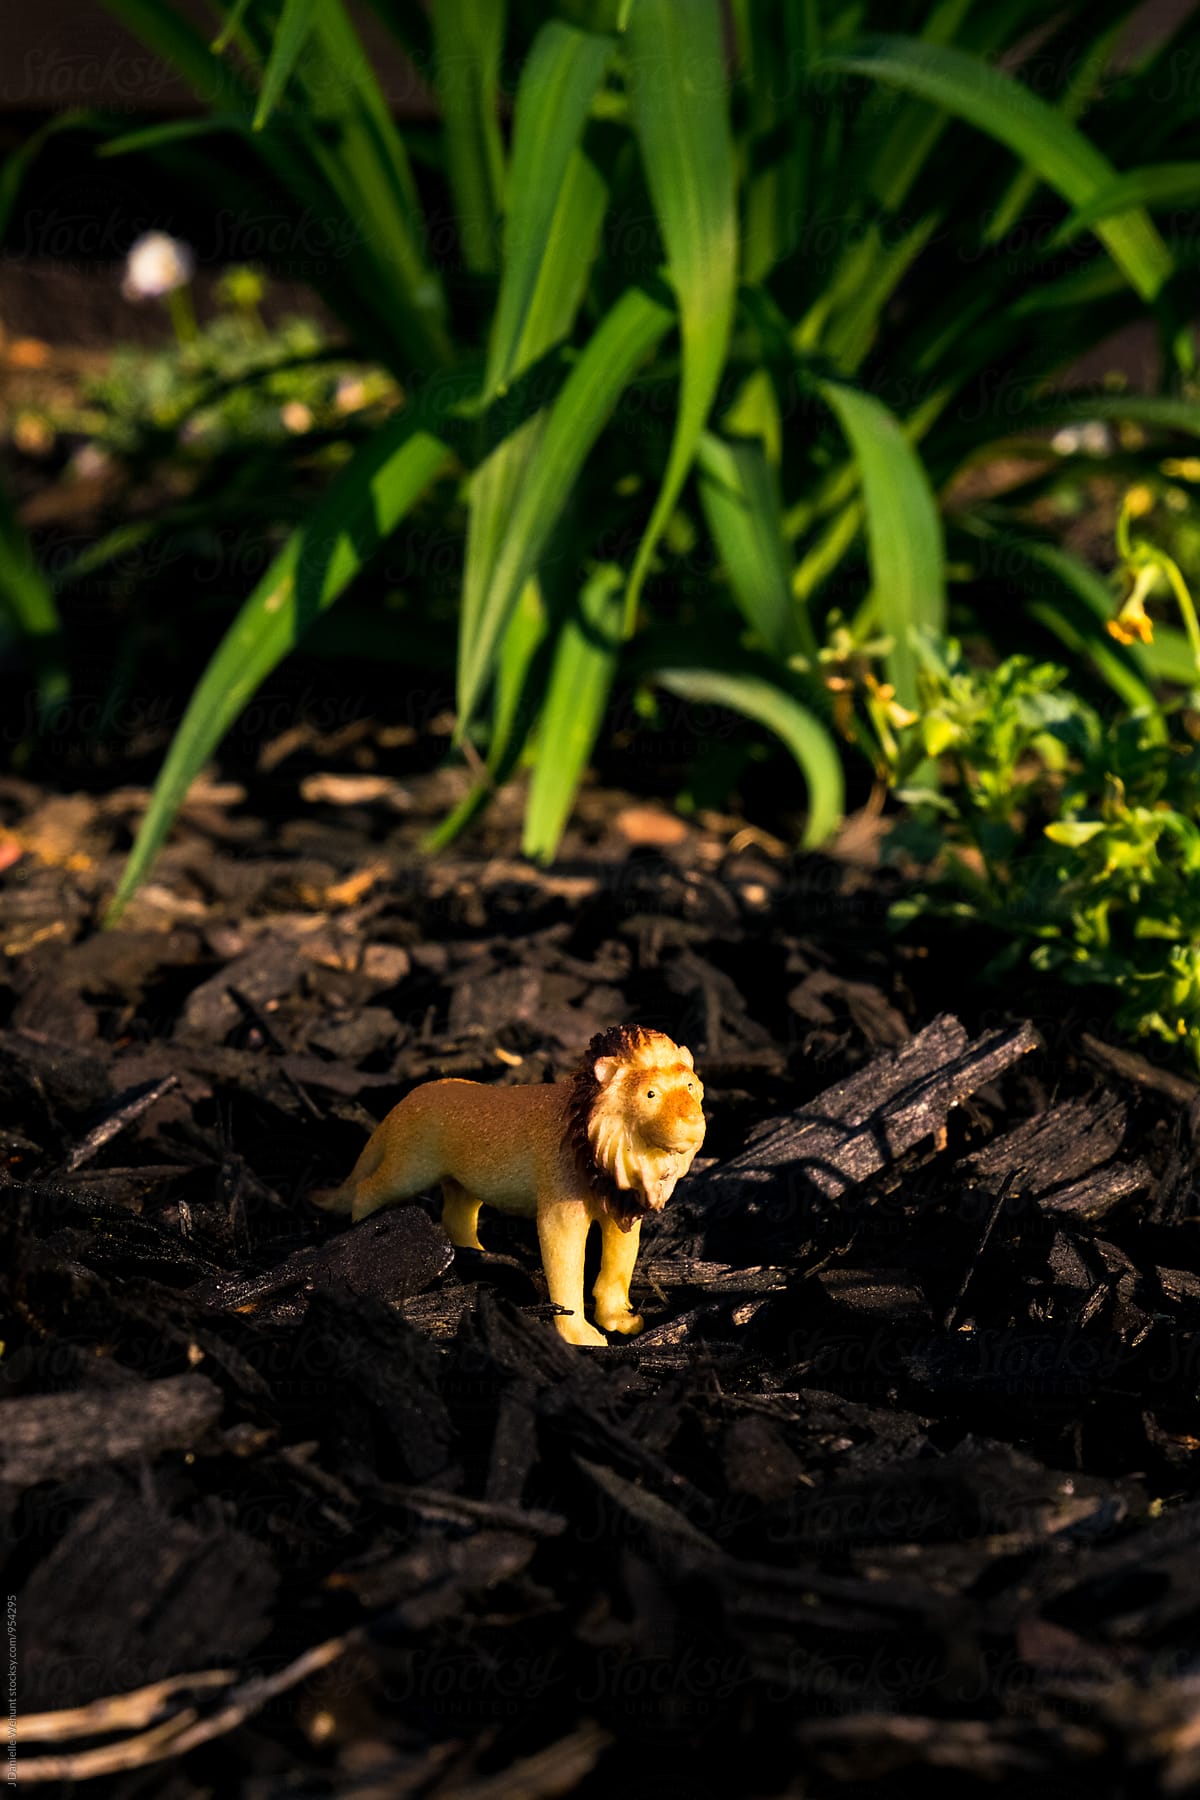 Miniature Plastic Toy Lion in earth and grass